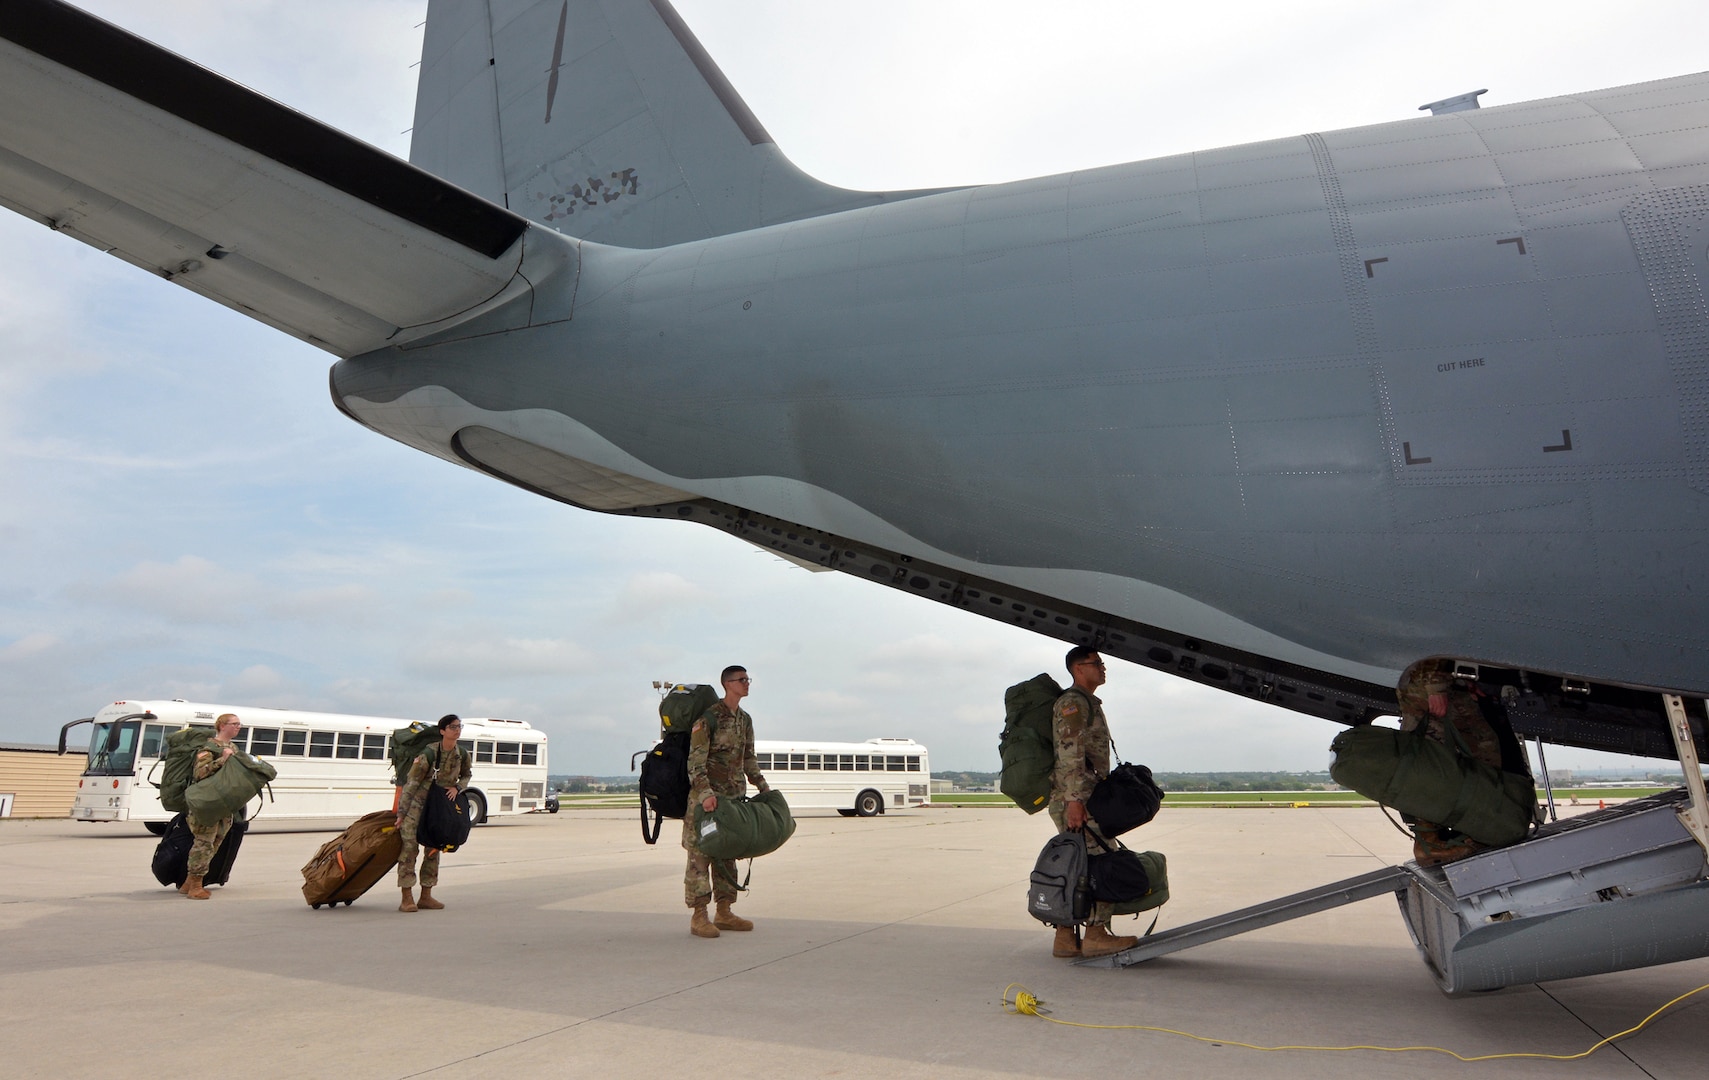 Soldiers board aircraft.